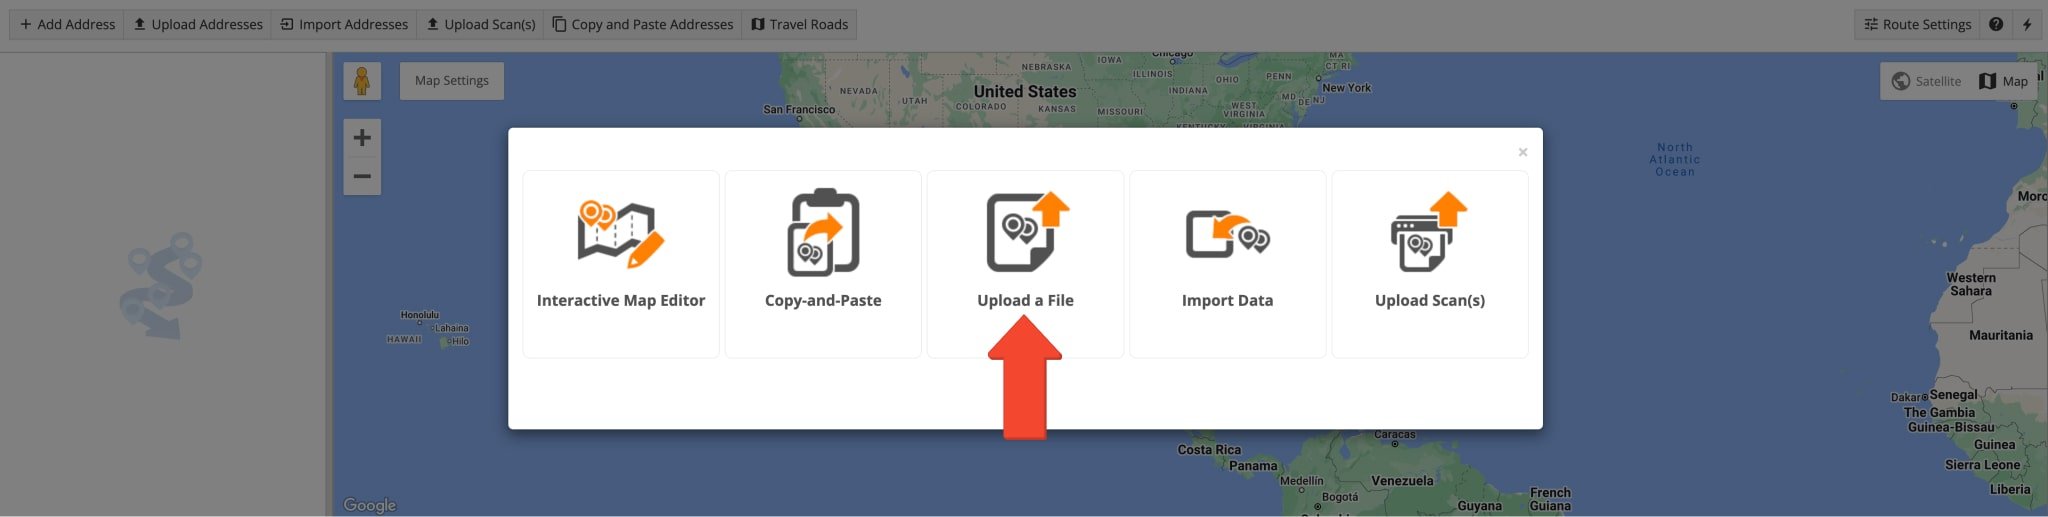 Upload a file with route stop addresses and custom data to plan and optimize routes.